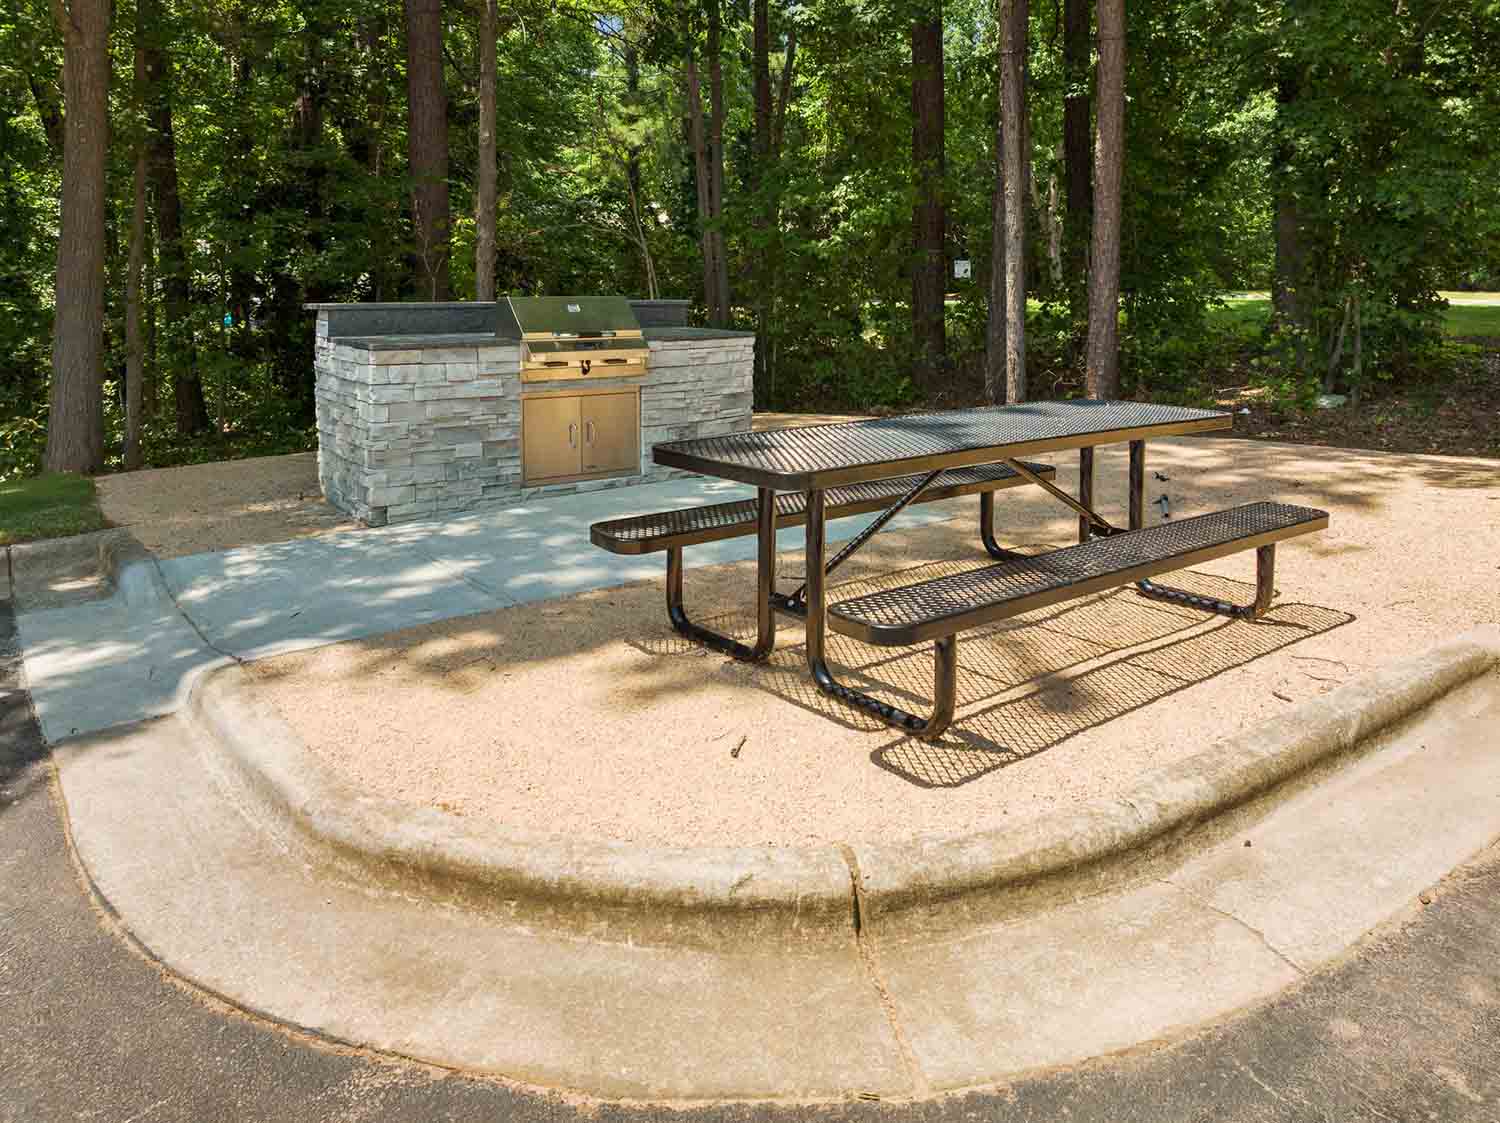 Blue hill grill area and picnic table